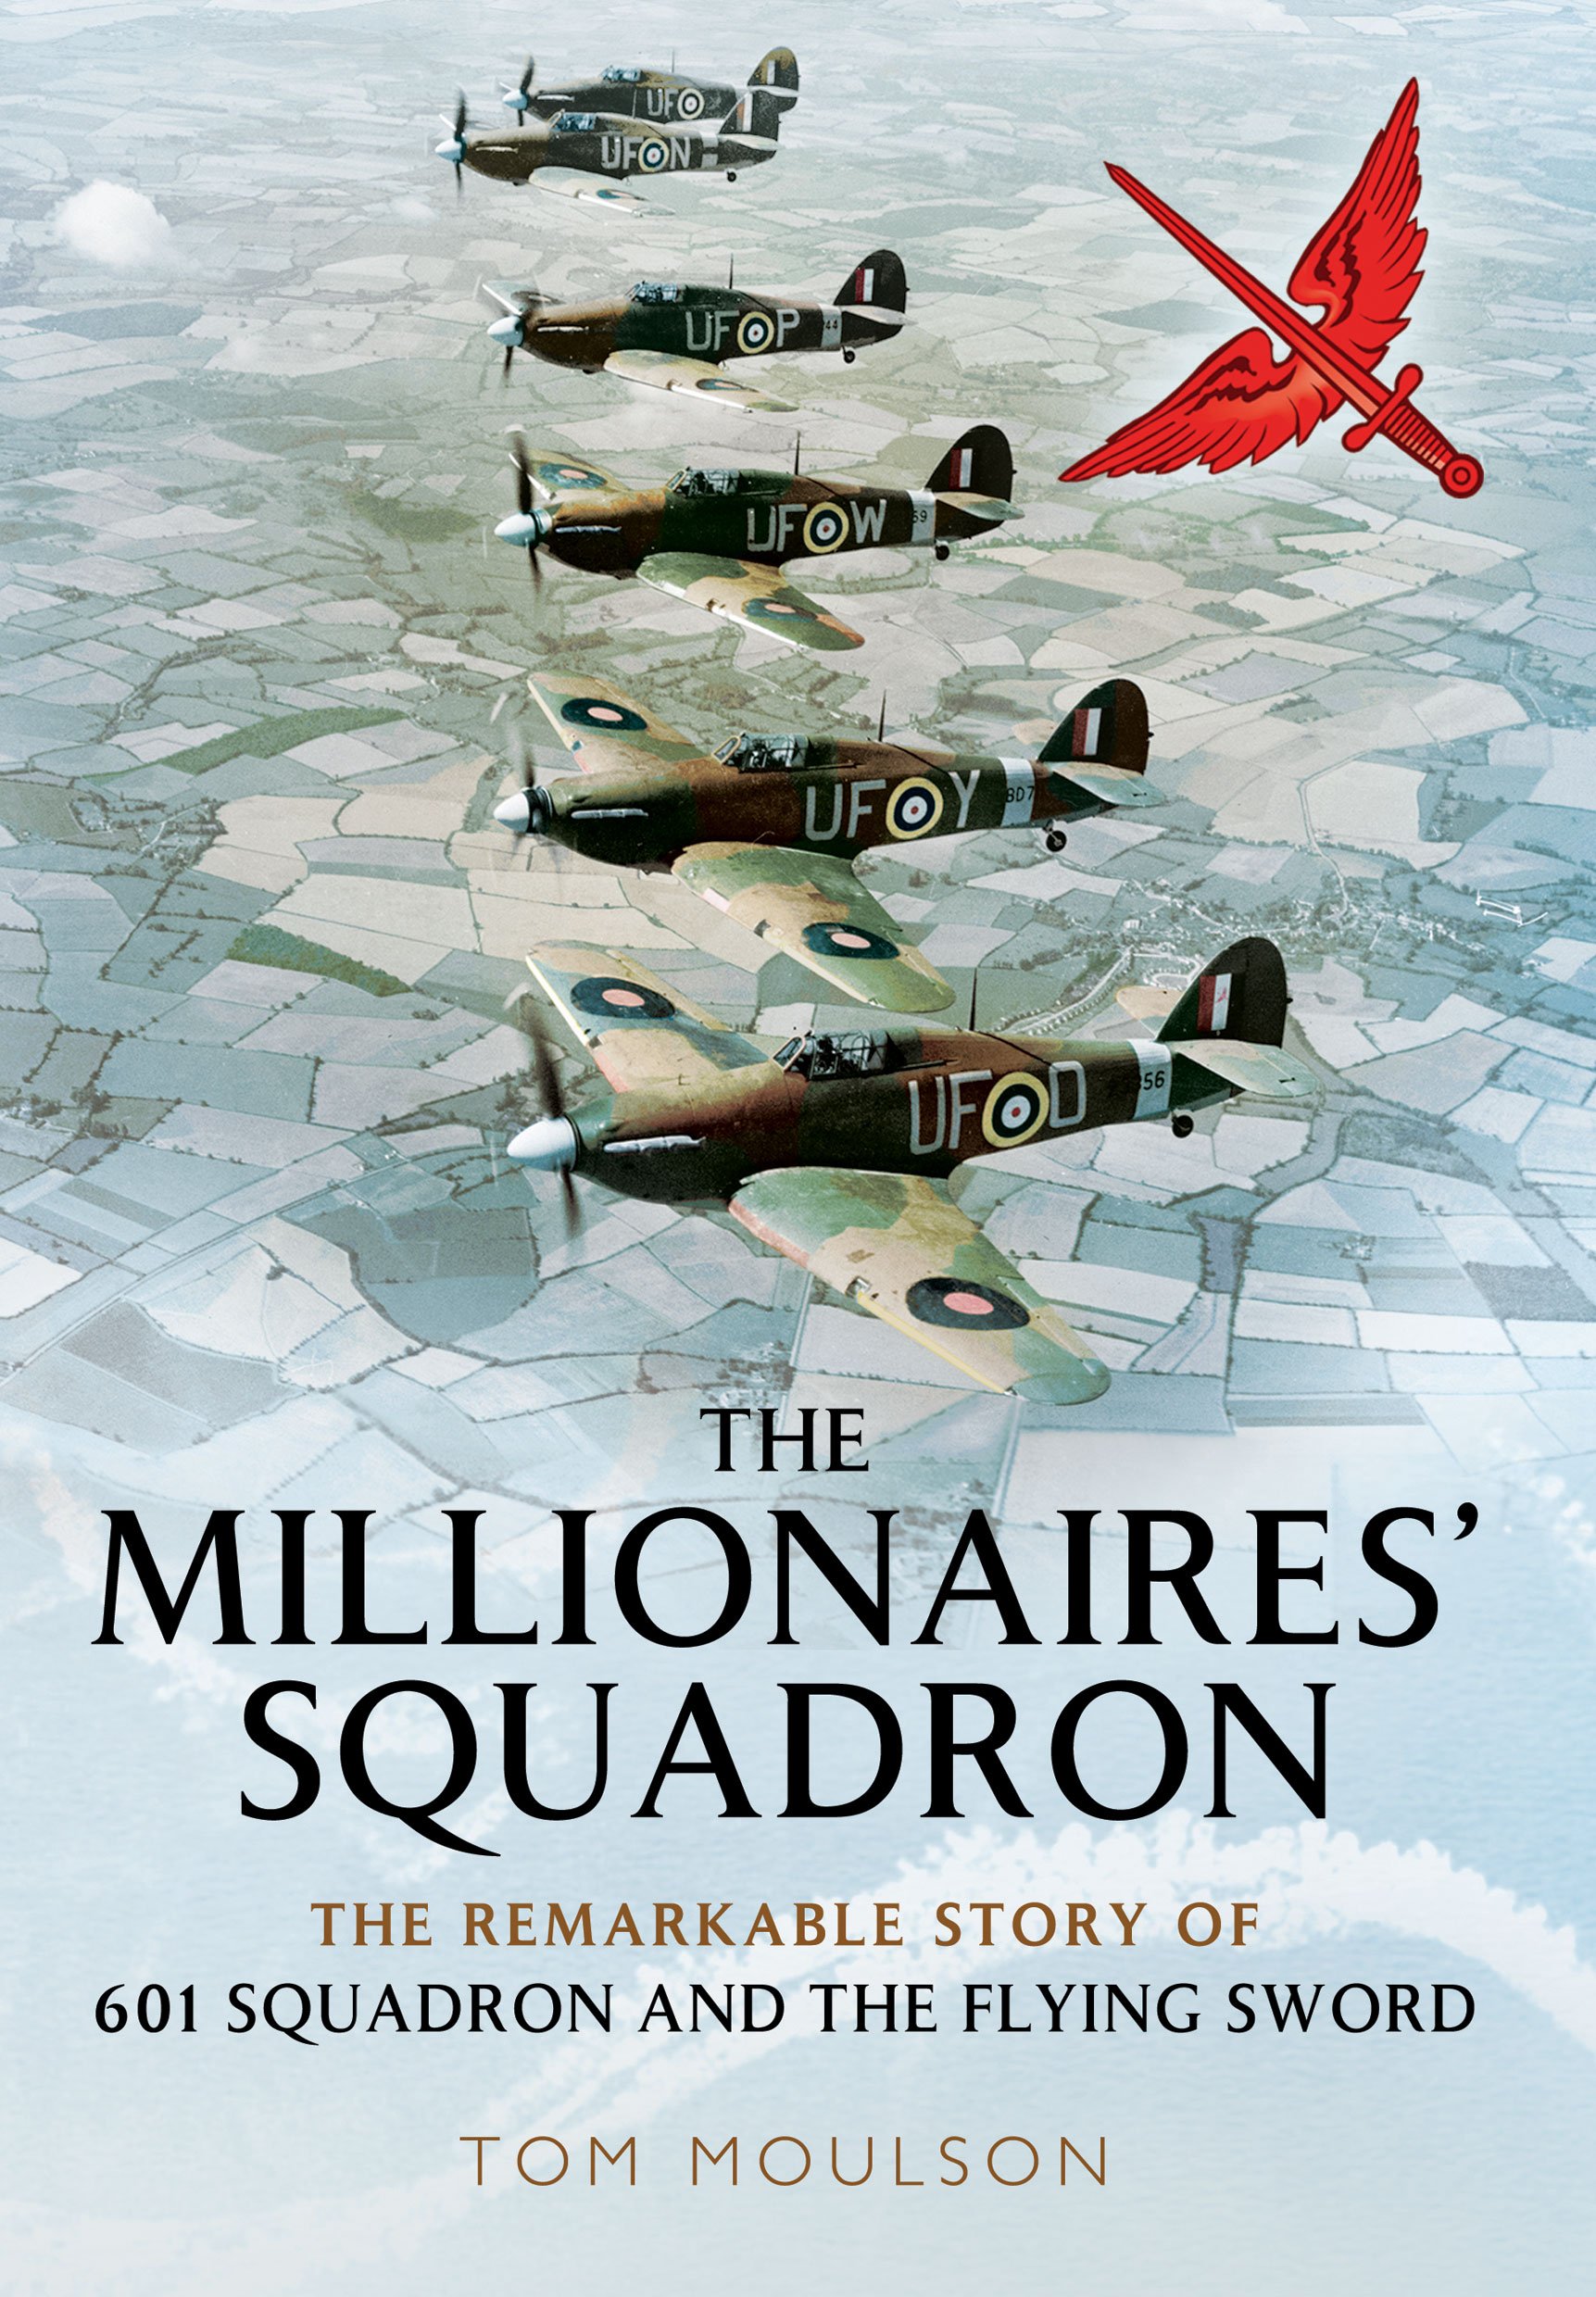 The Millionaires’ Squadron: The Remarkable Story Of 601 Squadron And The Flying Sword